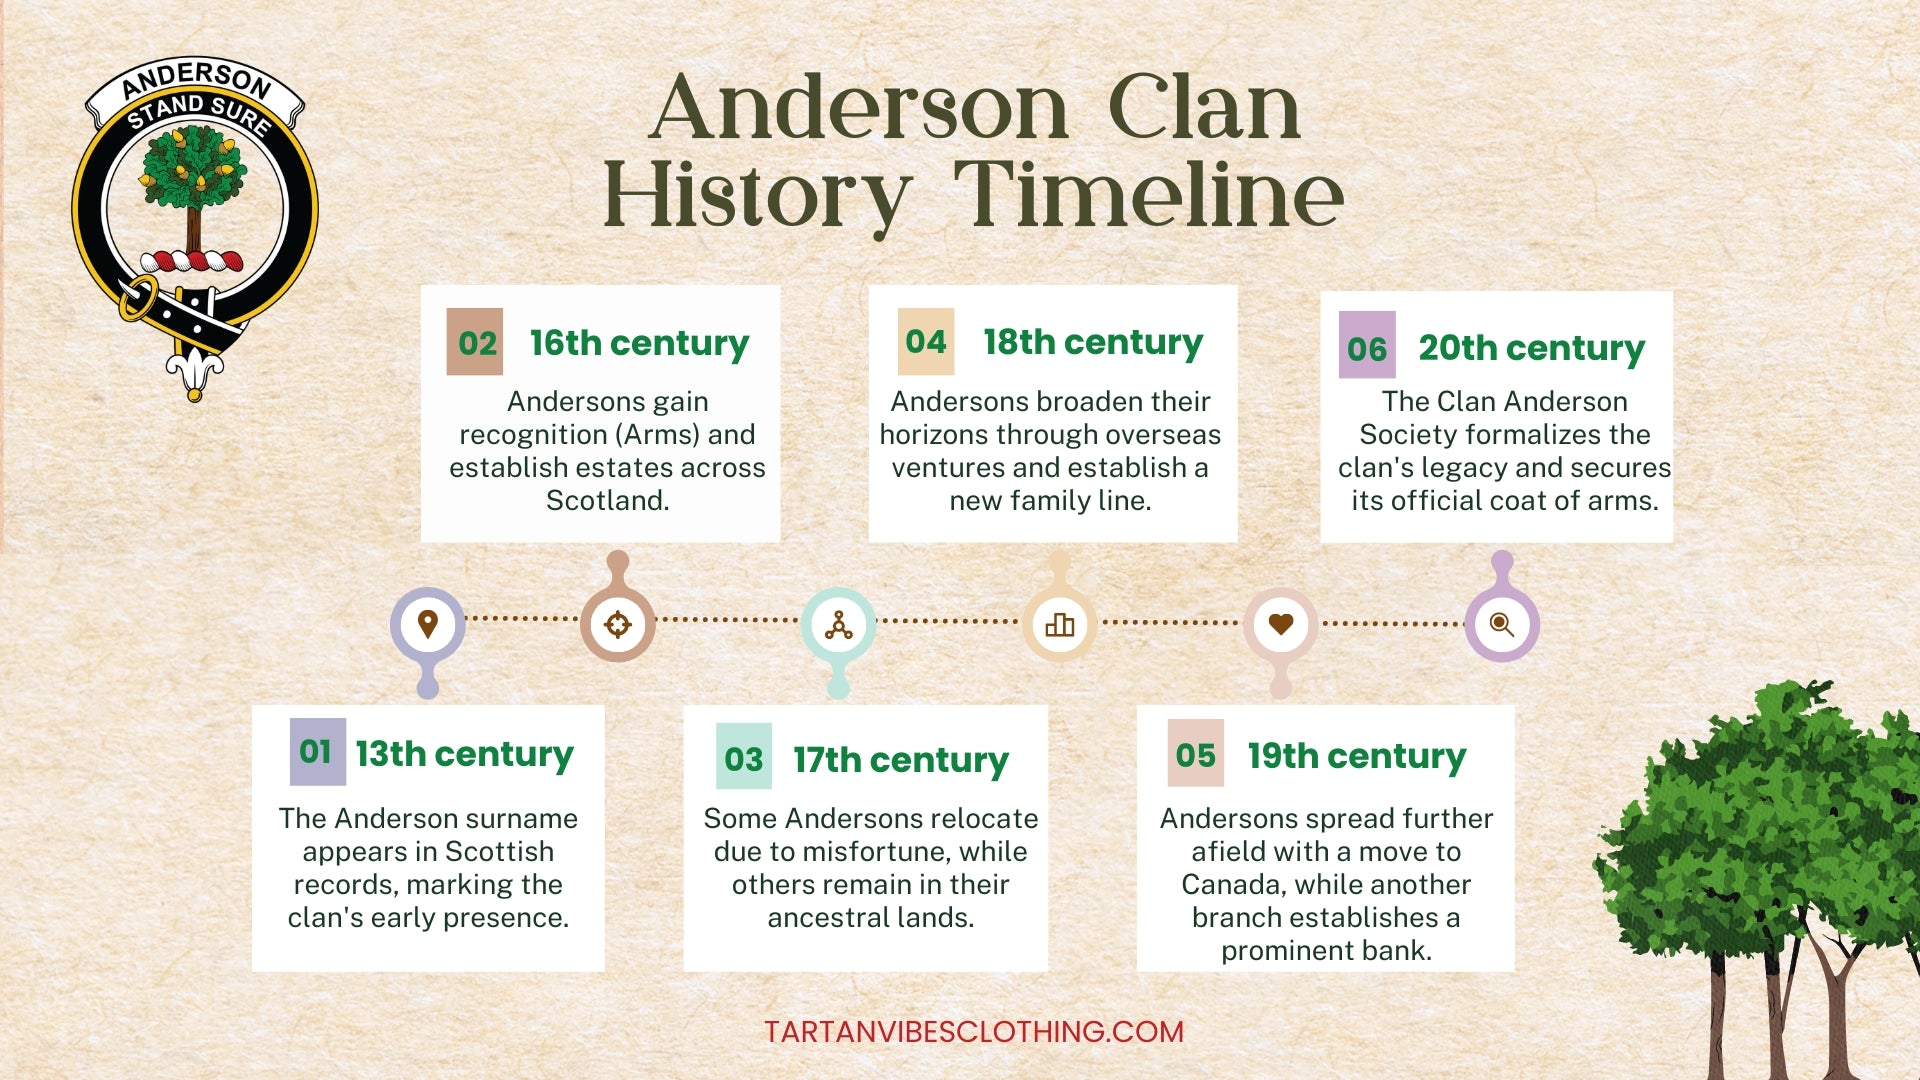 Anderson Clan History Timeline